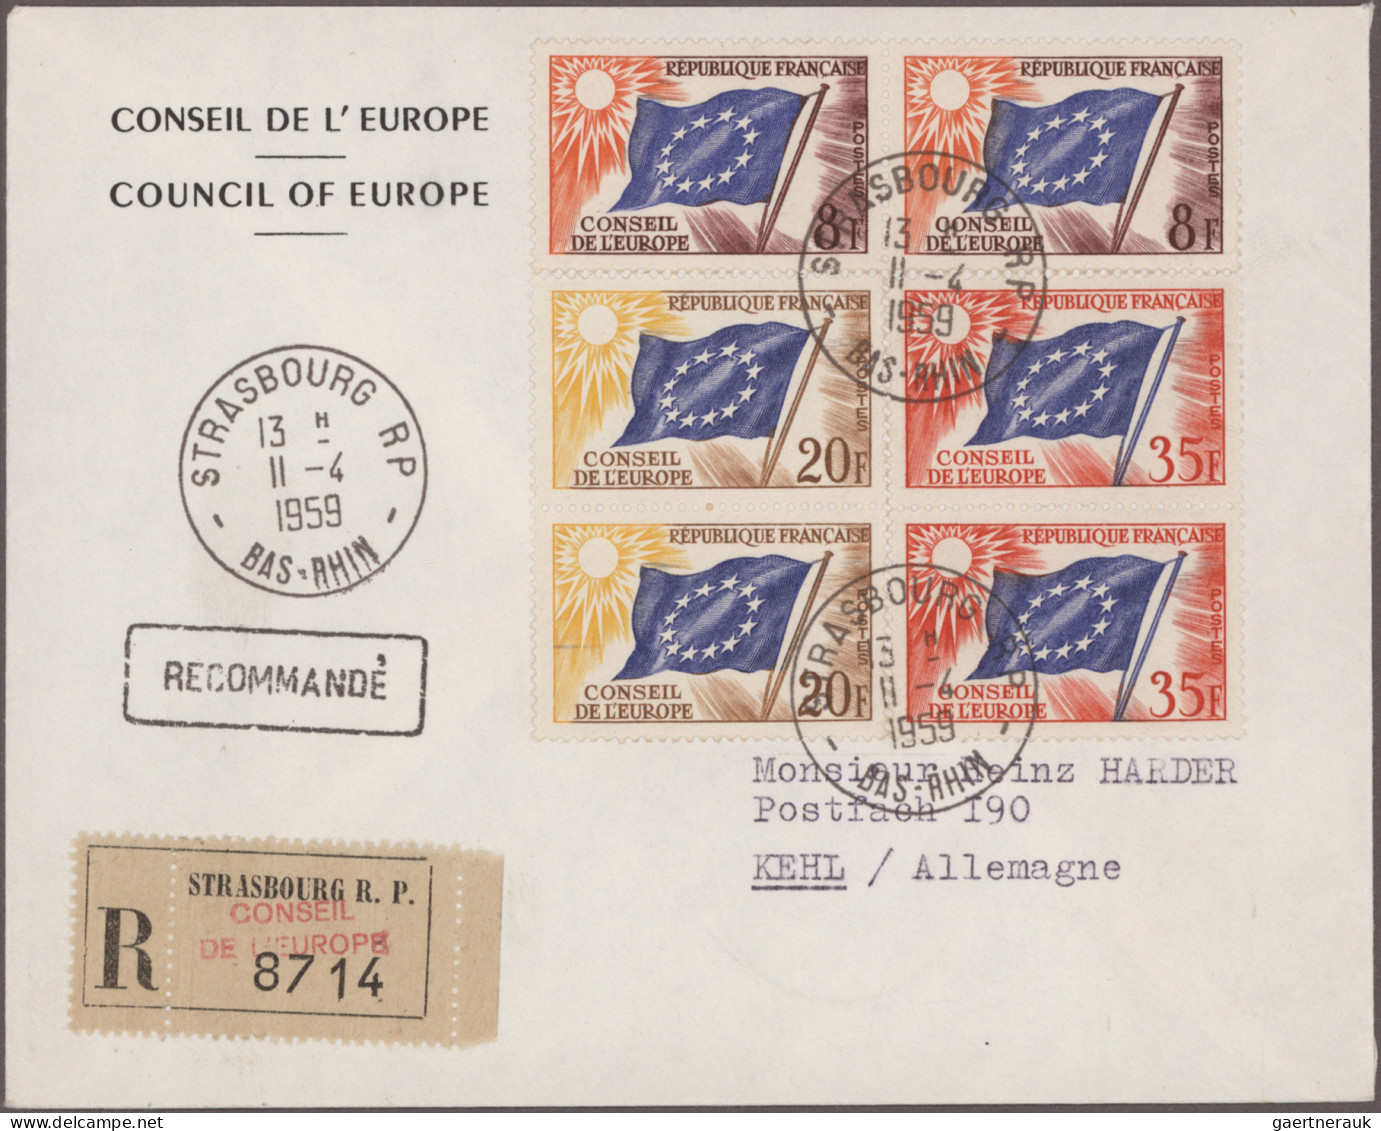 Thematics:  Europe: 1958/1989, COUNCIL OF EUROPE in Strasbourg and related, extr